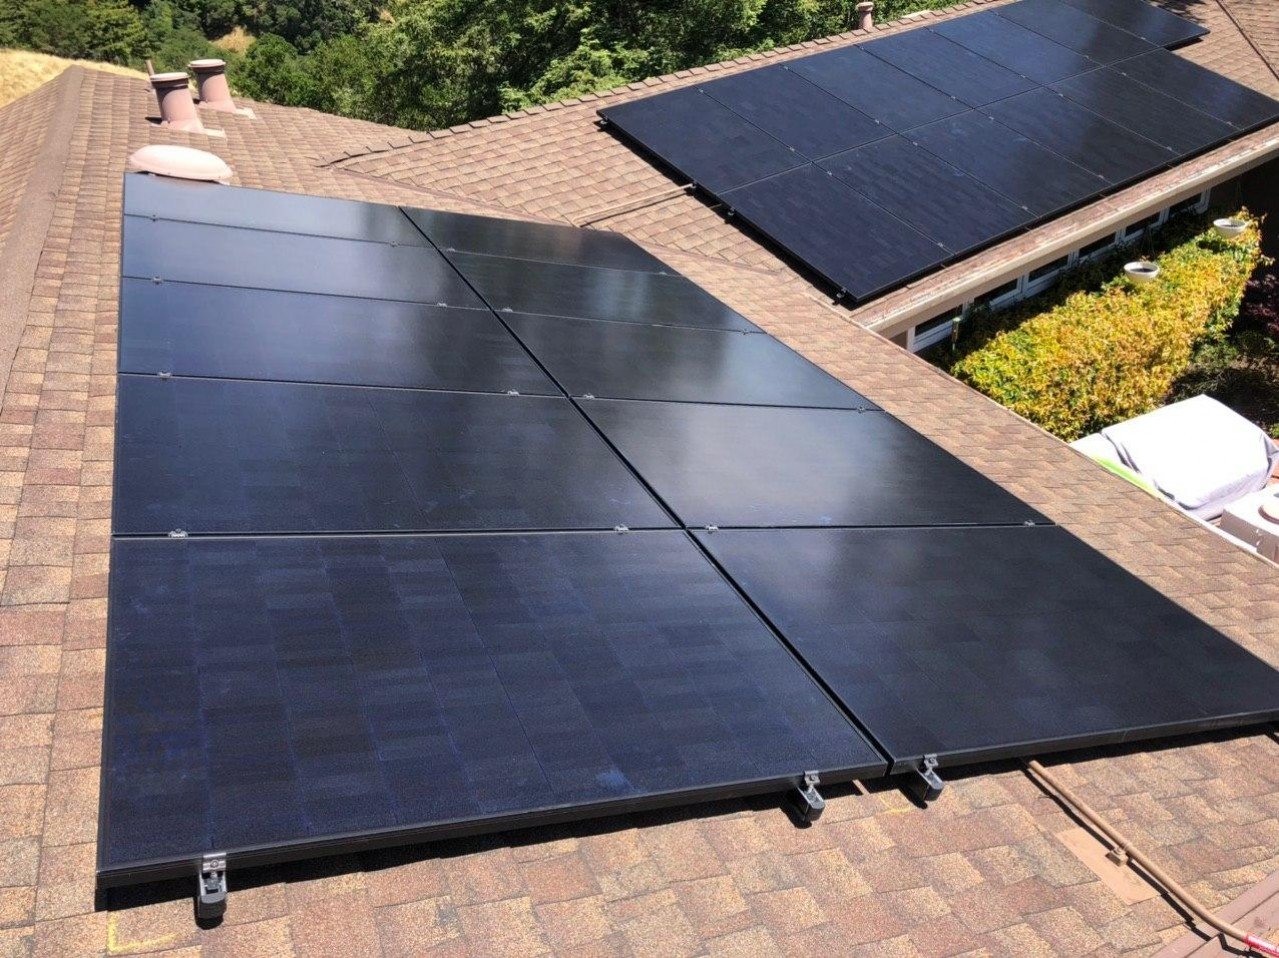 This 37 Solaria Panel System powers not only their home but their new HVAC system as well. 